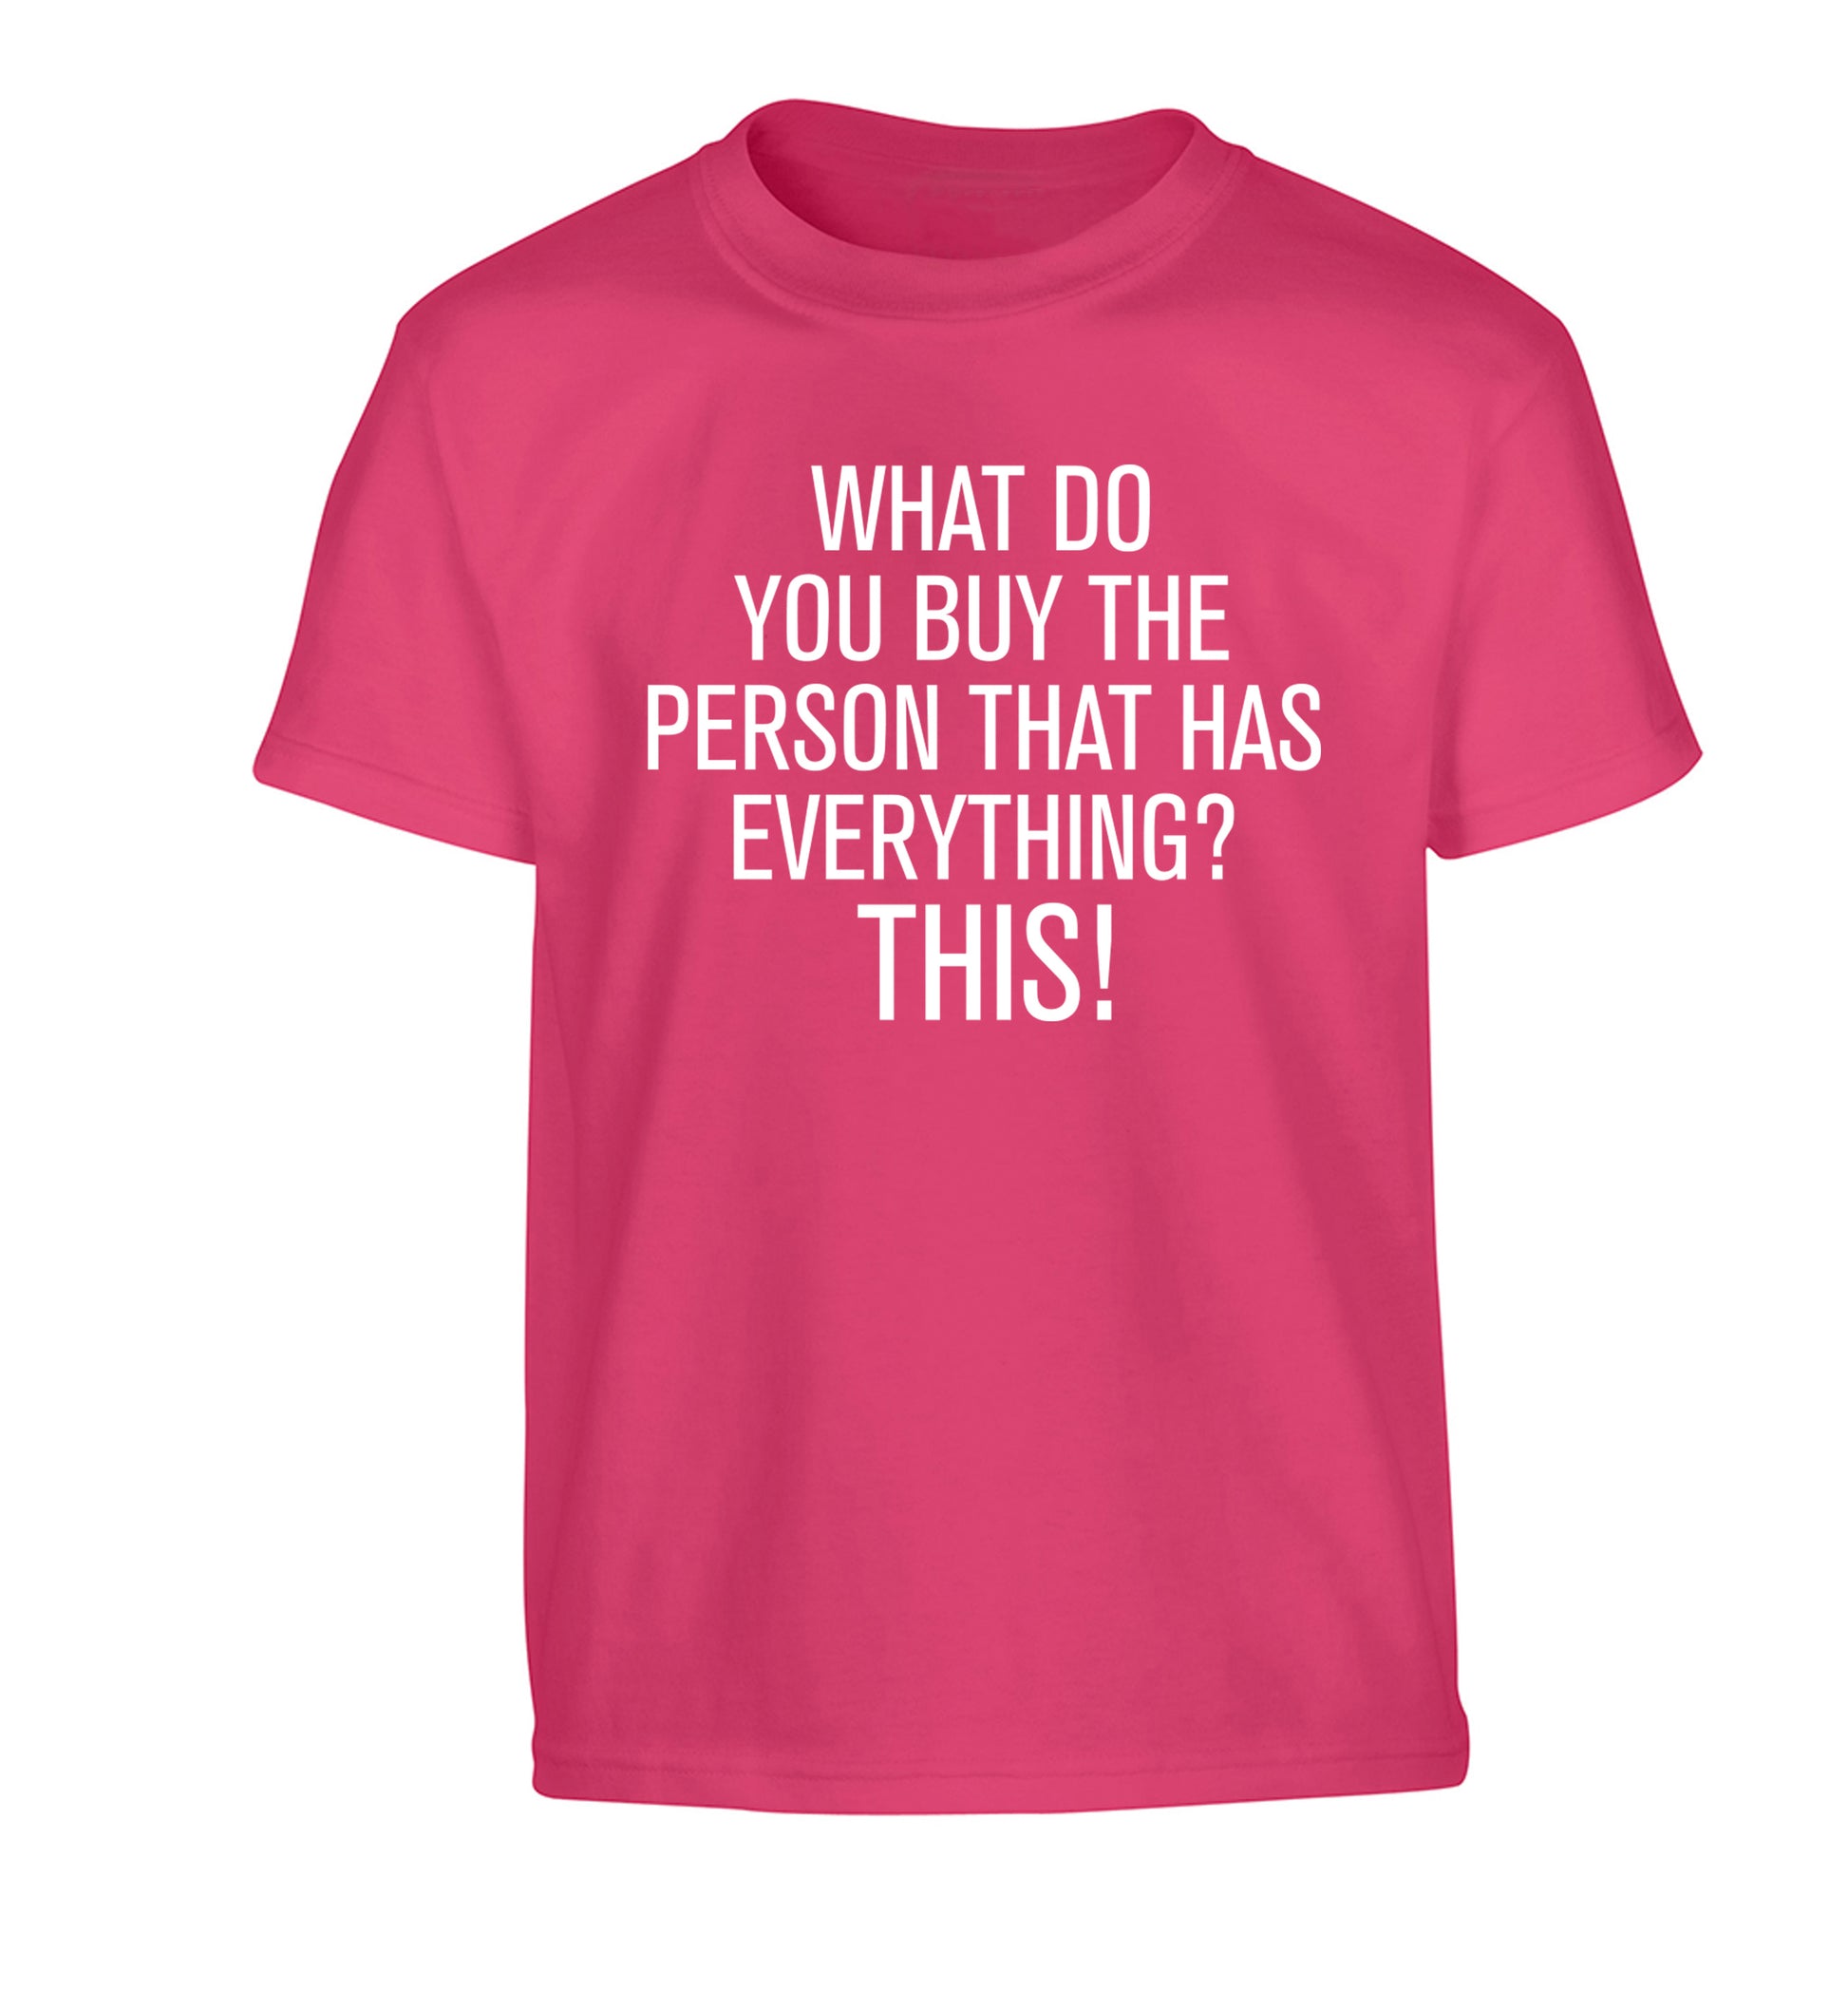 What do you buy the person that has everything? This! Children's pink Tshirt 12-13 Years